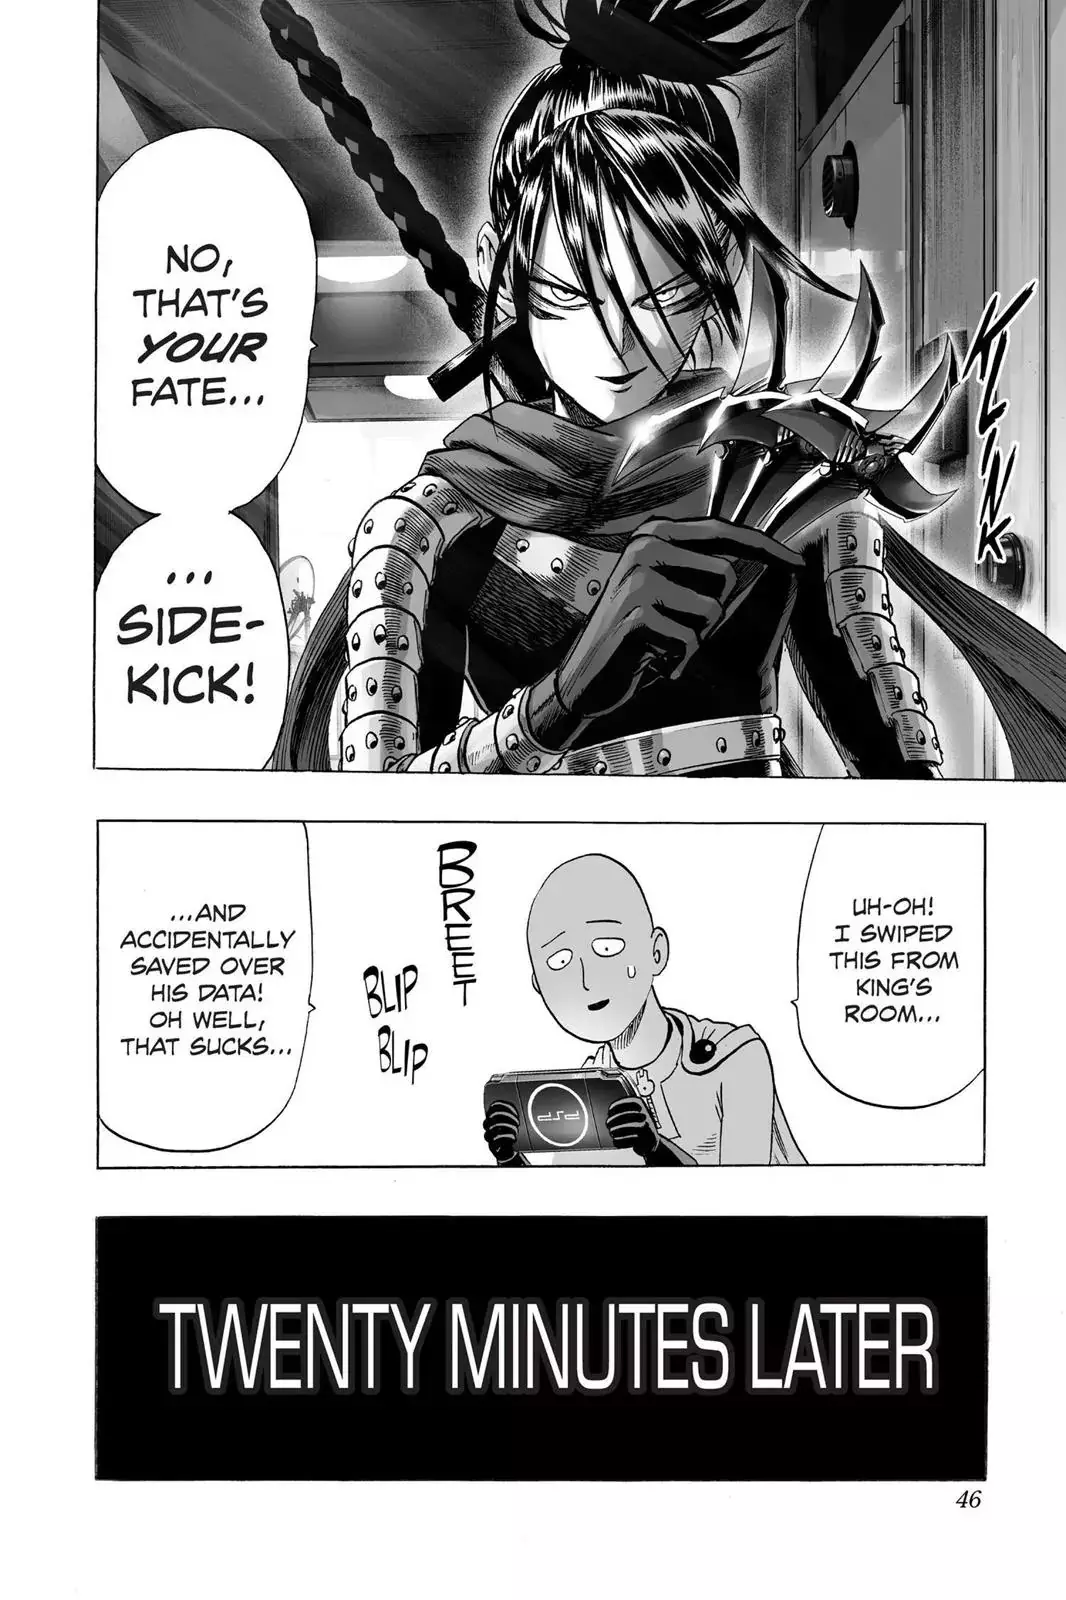 One Punch Man Chapter 42, READ One Punch Man Chapter 42 ONLINE, lost in the cloud genre,lost in the cloud gif,lost in the cloud girl,lost in the cloud goods,lost in the cloud goodreads,lost in the cloud,lost ark cloud gaming,lost odyssey cloud gaming,lost in the cloud fanart,lost in the cloud fanfic,lost in the cloud fandom,lost in the cloud first kiss,lost in the cloud font,lost in the cloud ending,lost in the cloud episode 97,lost in the cloud edit,lost in the cloud explained,lost in the cloud dog,lost in the cloud discord server,lost in the cloud desktop wallpaper,lost in the cloud drawing,can't find my cloud on network,lost in the cloud characters,lost in the cloud chapter 93 release date,lost in the cloud birthday,lost in the cloud birthday art,lost in the cloud background,lost in the cloud banner,lost in the clouds meaning,what is the black cloud in lost,lost in the cloud ao3,lost in the cloud anime,lost in the cloud art,lost in the cloud author twitter,lost in the cloud author instagram,lost in the cloud artist,lost in the cloud acrylic stand,lost in the cloud artist twitter,lost in the cloud art style,lost in the cloud analysis